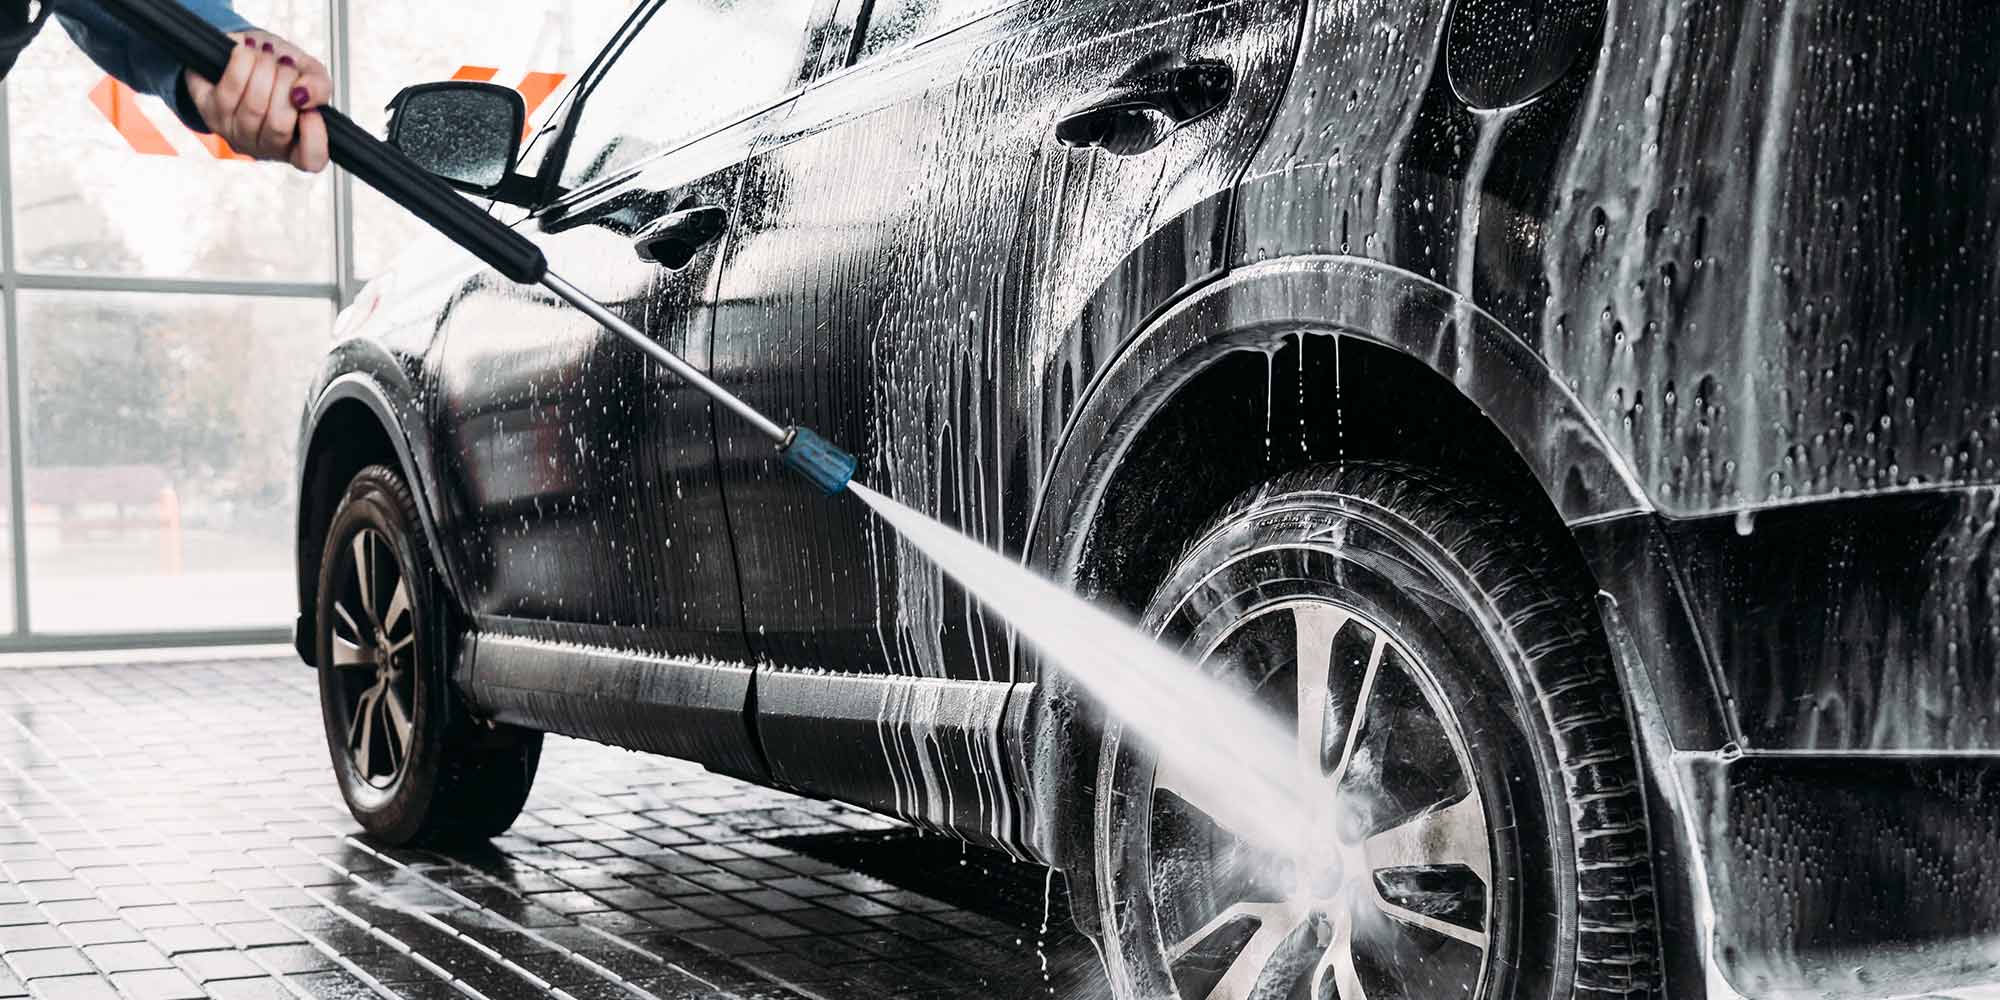 How To Properly Wash and Clean Your Car